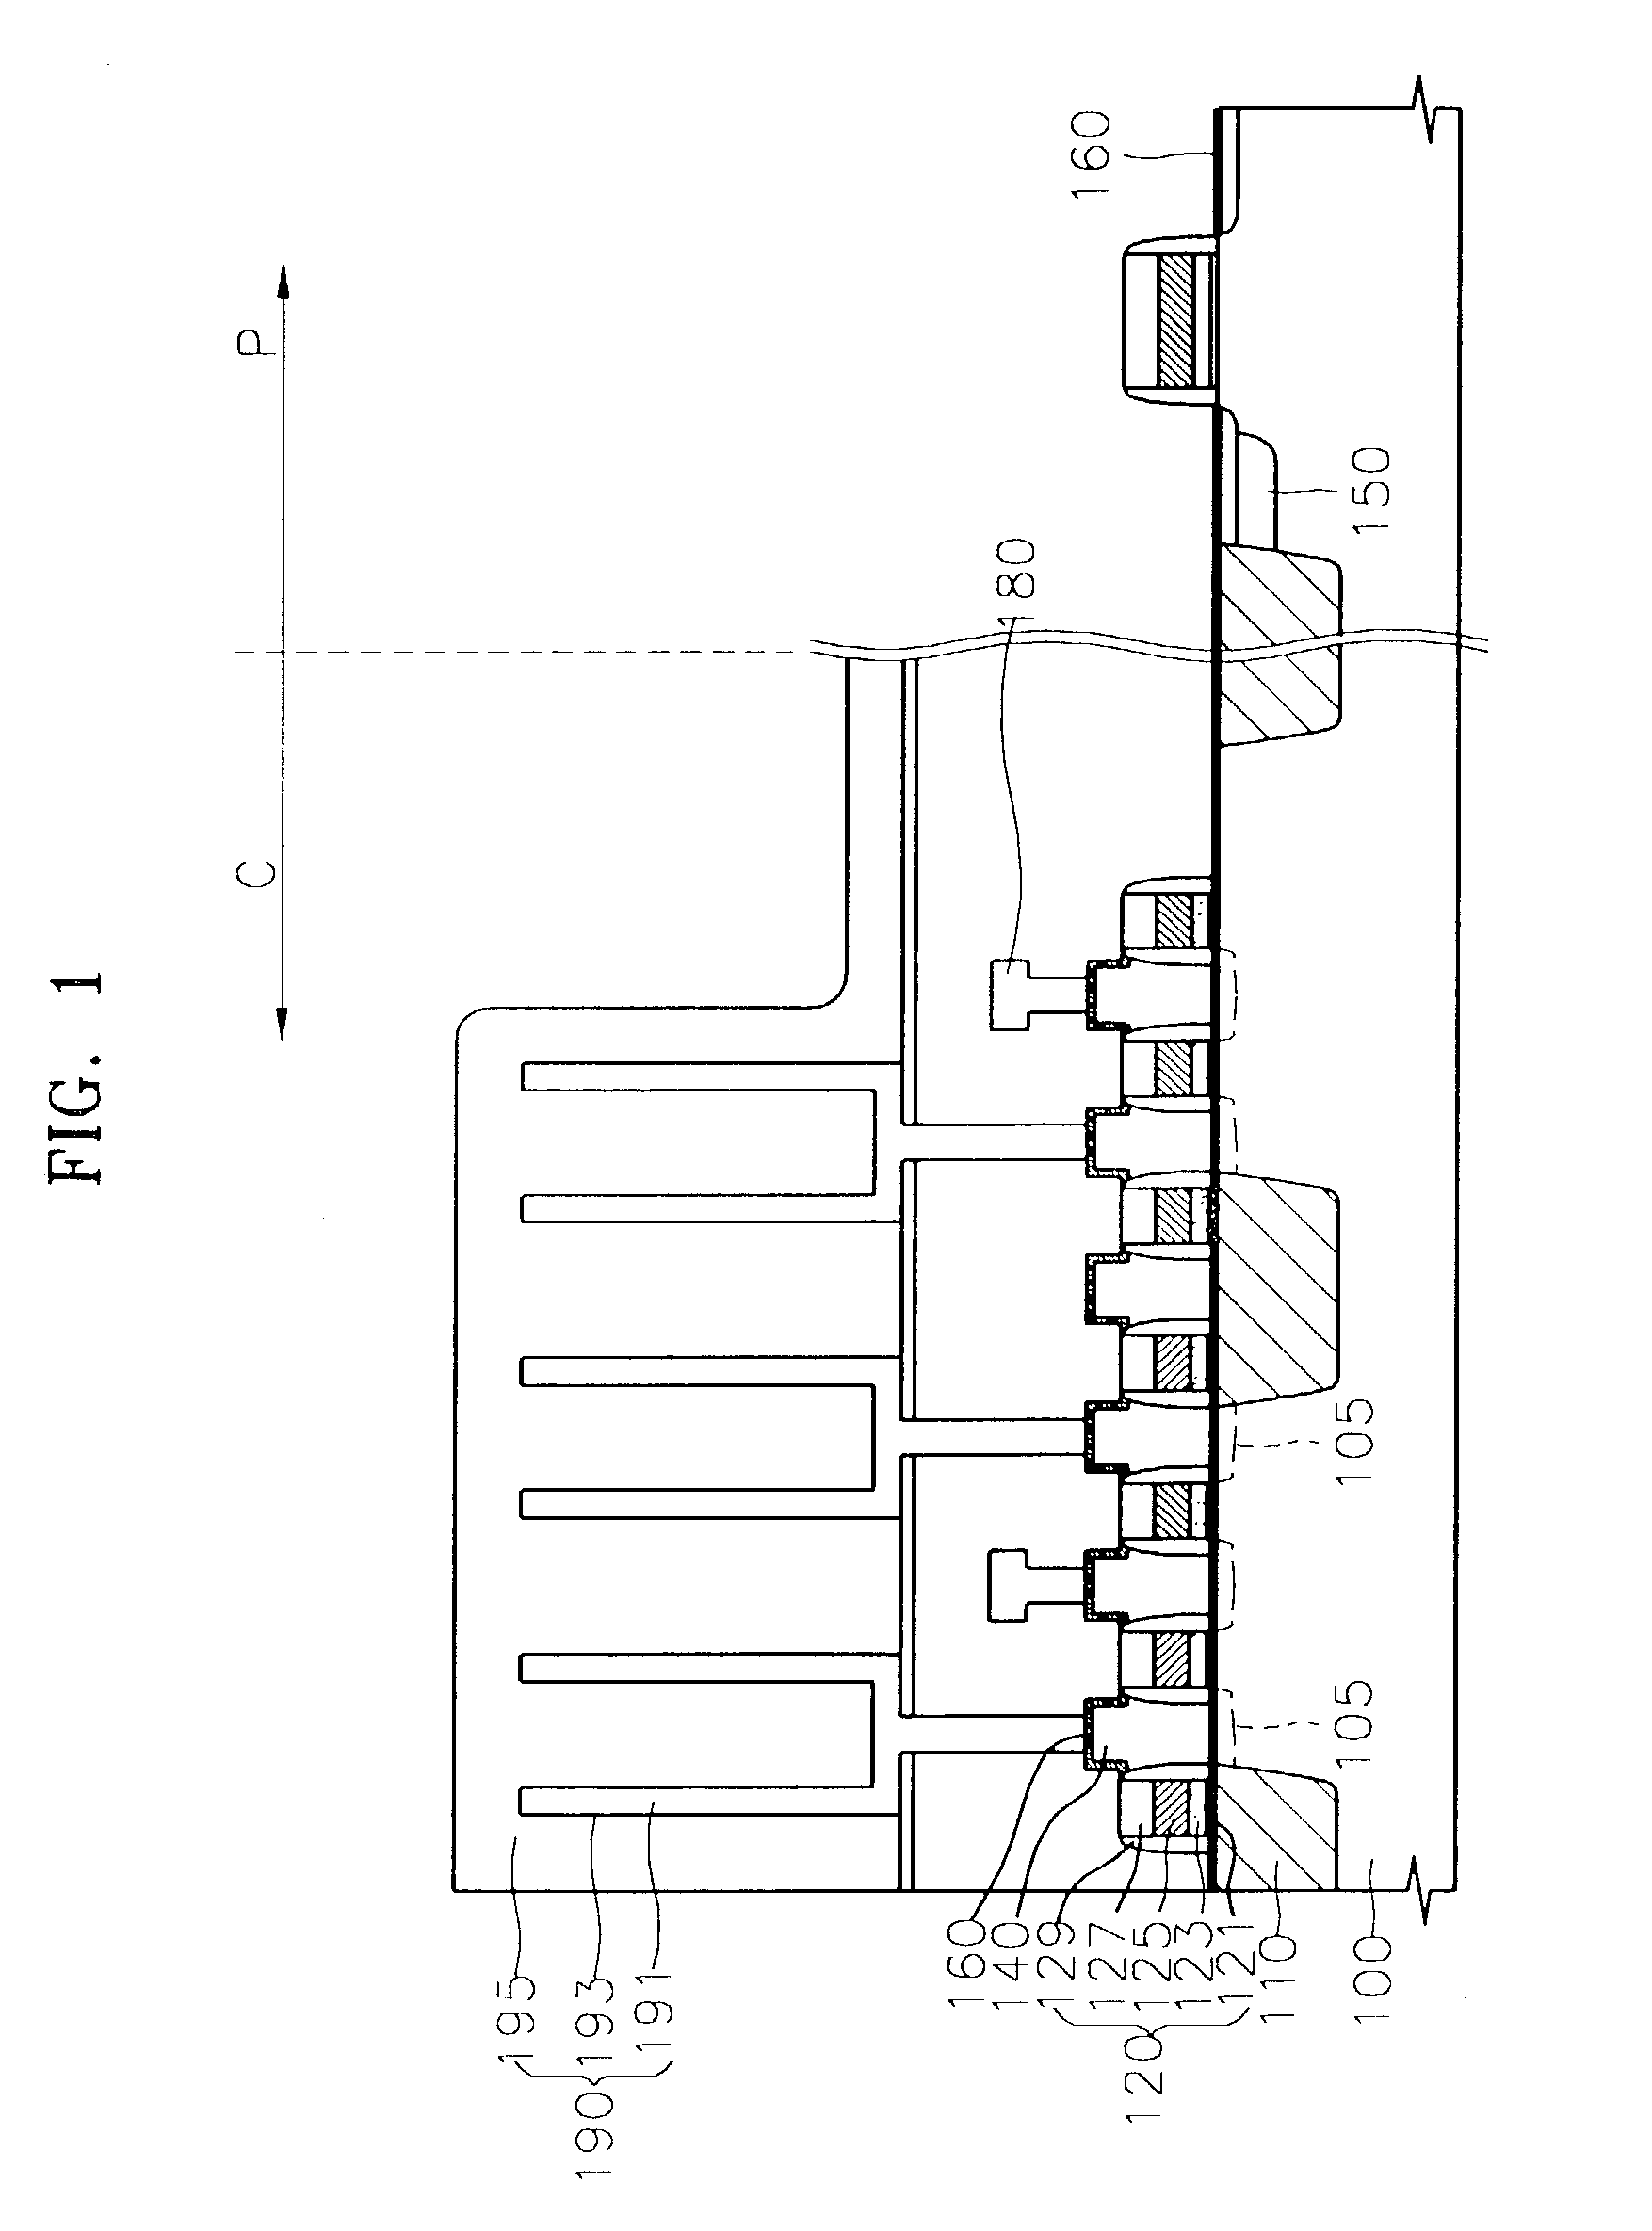 Semiconductor memory devices having extending contact pads and related methods